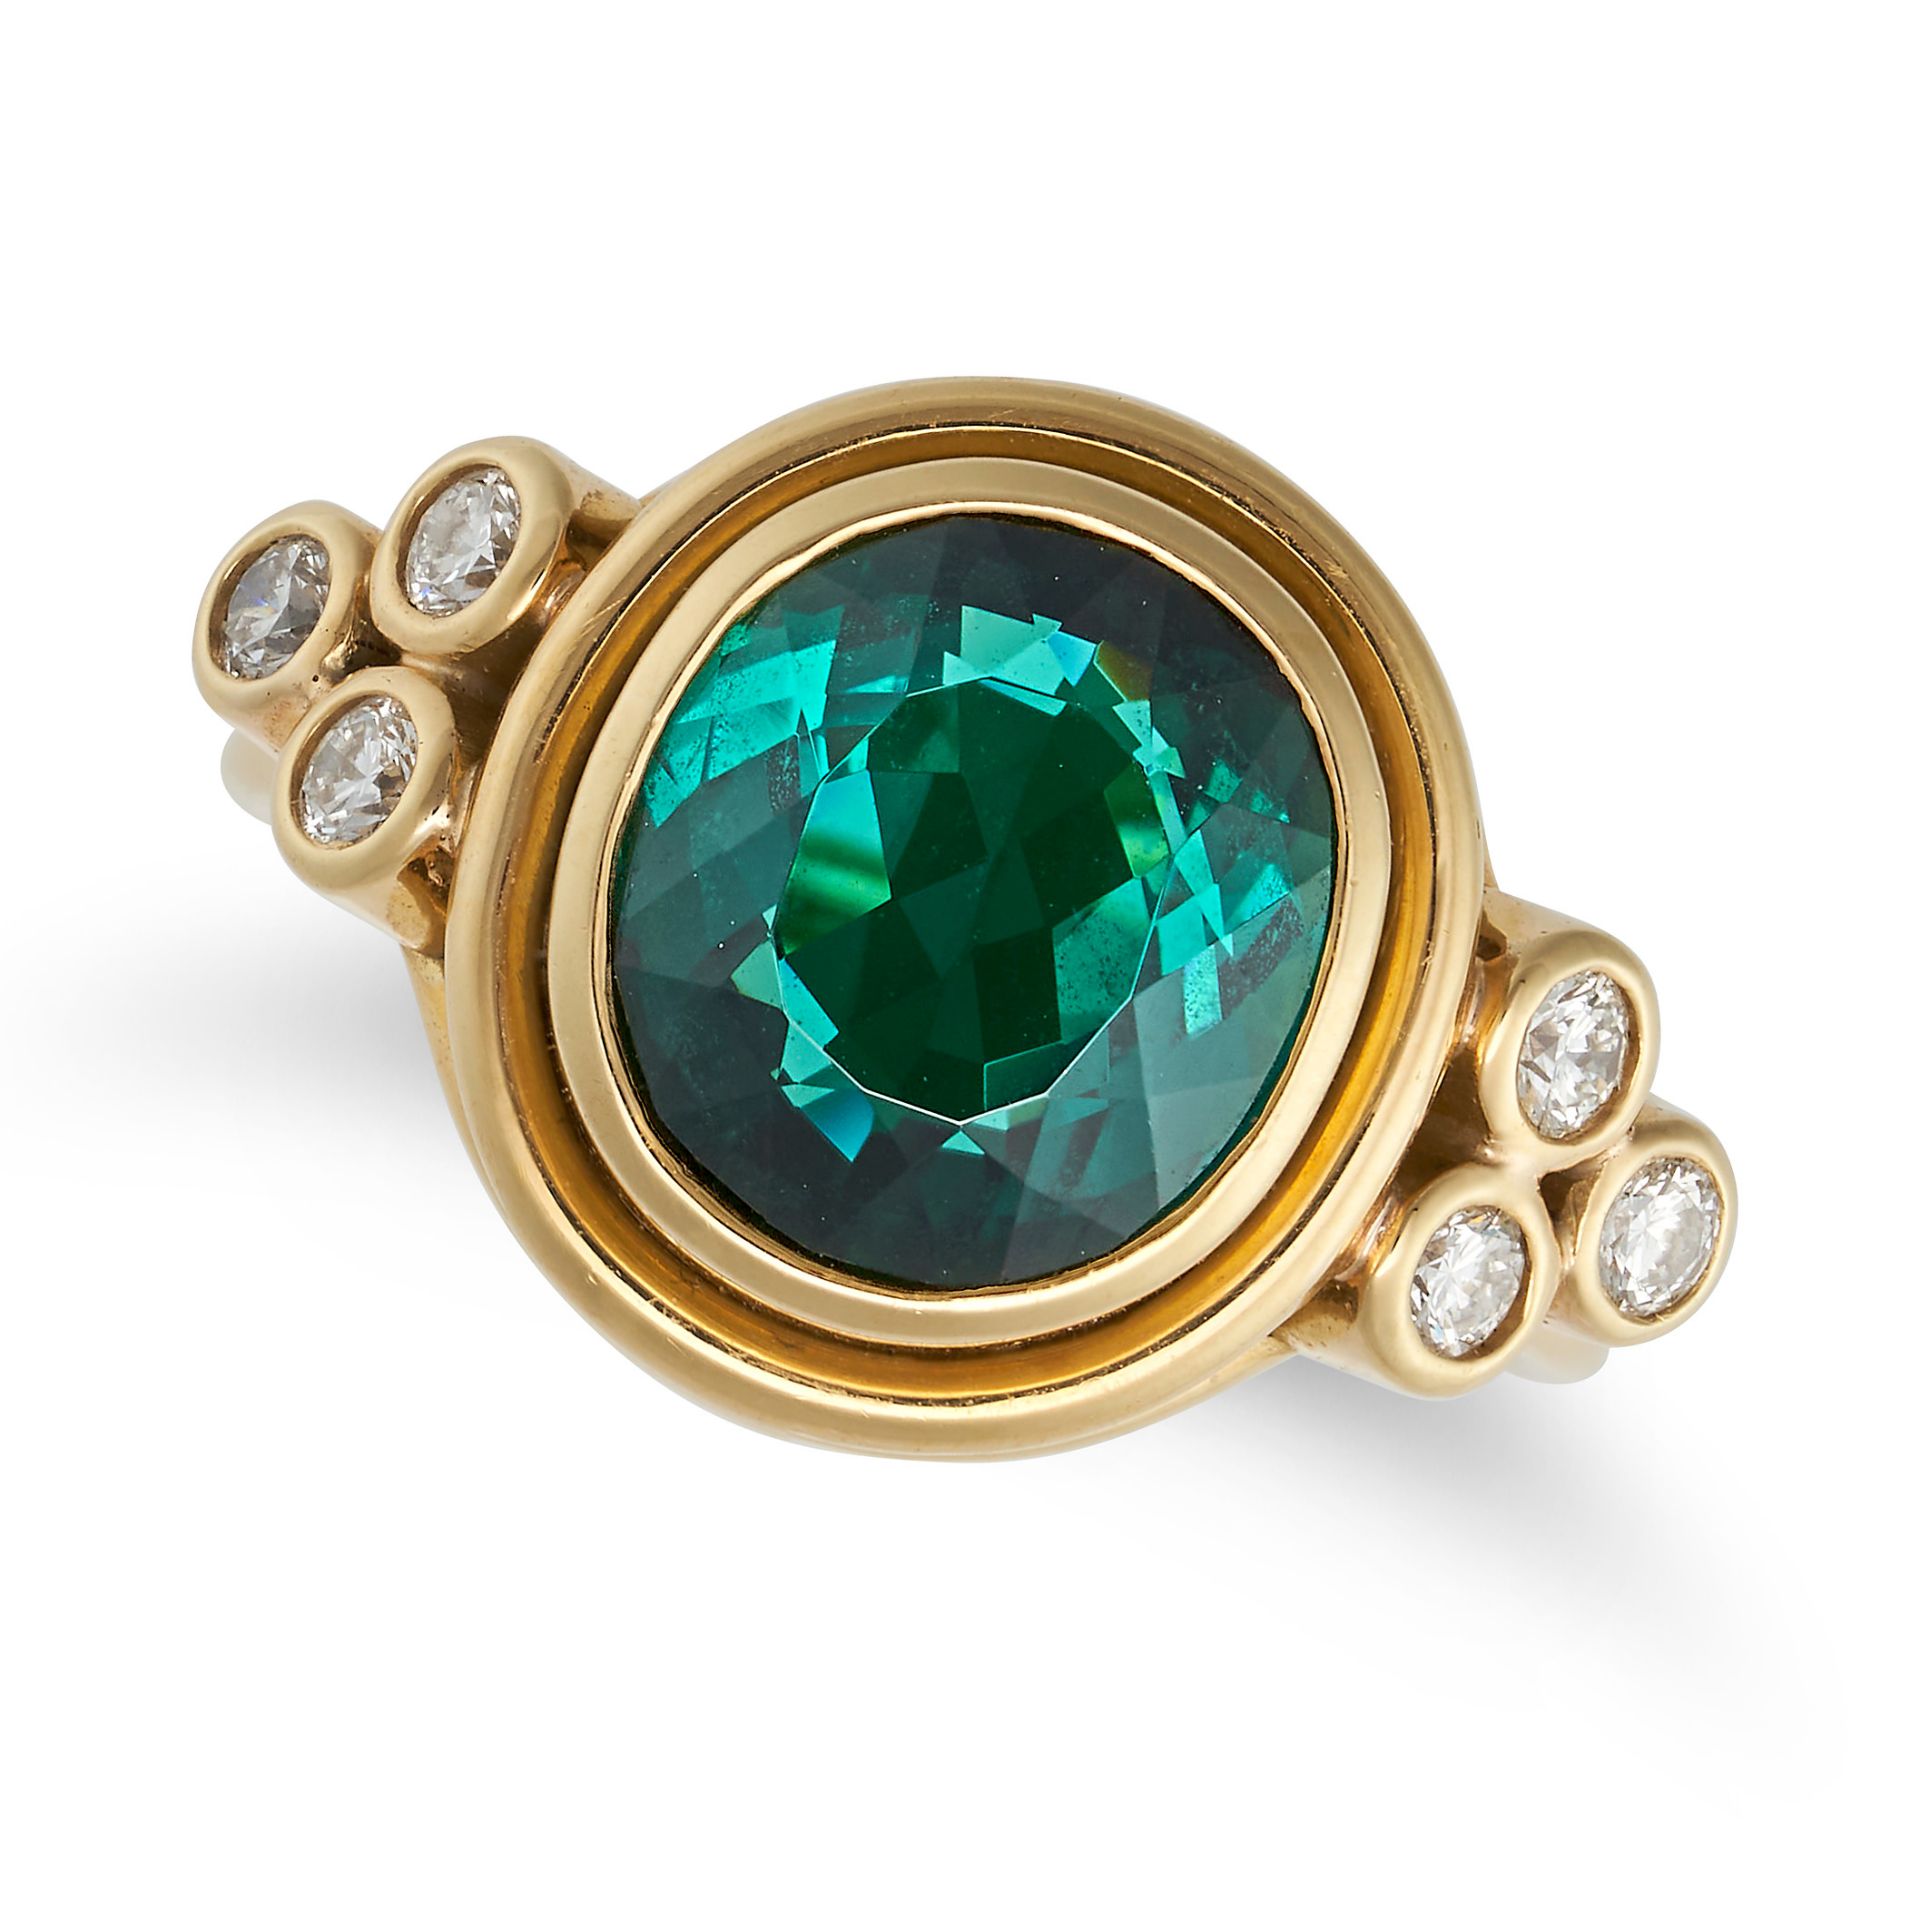 TEMPLE ST. CLAIR, A GREEN TOURMALINE AND DIAMOND RING in 18ct yellow gold, set with an oval cut g...